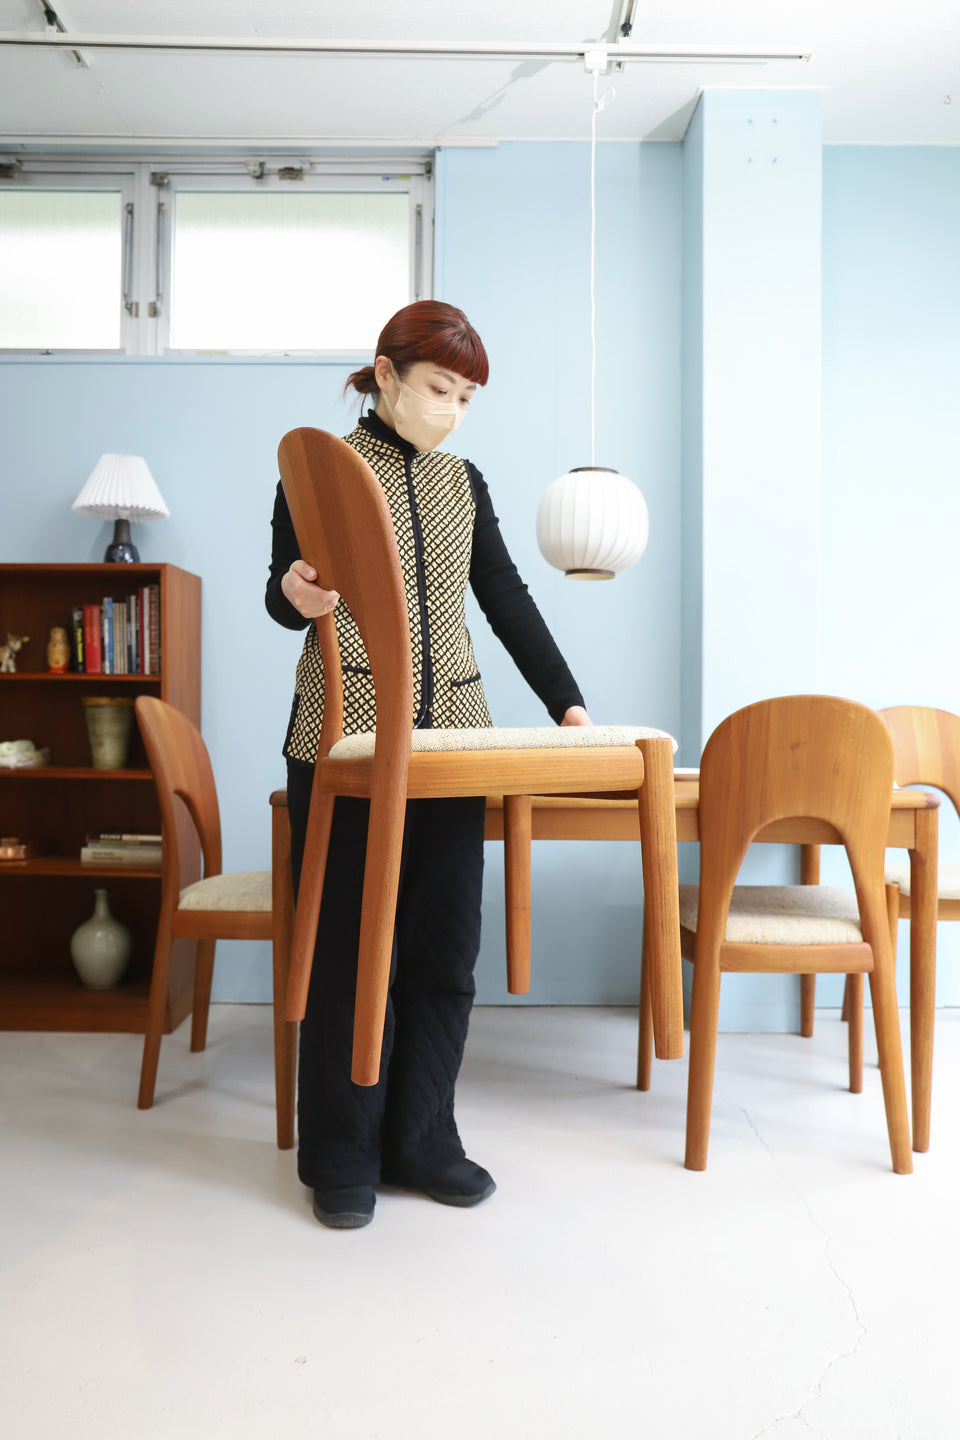 KOEFOEDS HORNSLET Dining Chair Morten Niels Koefoed/デンマークヴィンテージ ダイニングチェア 椅子 ニールス・コフォード